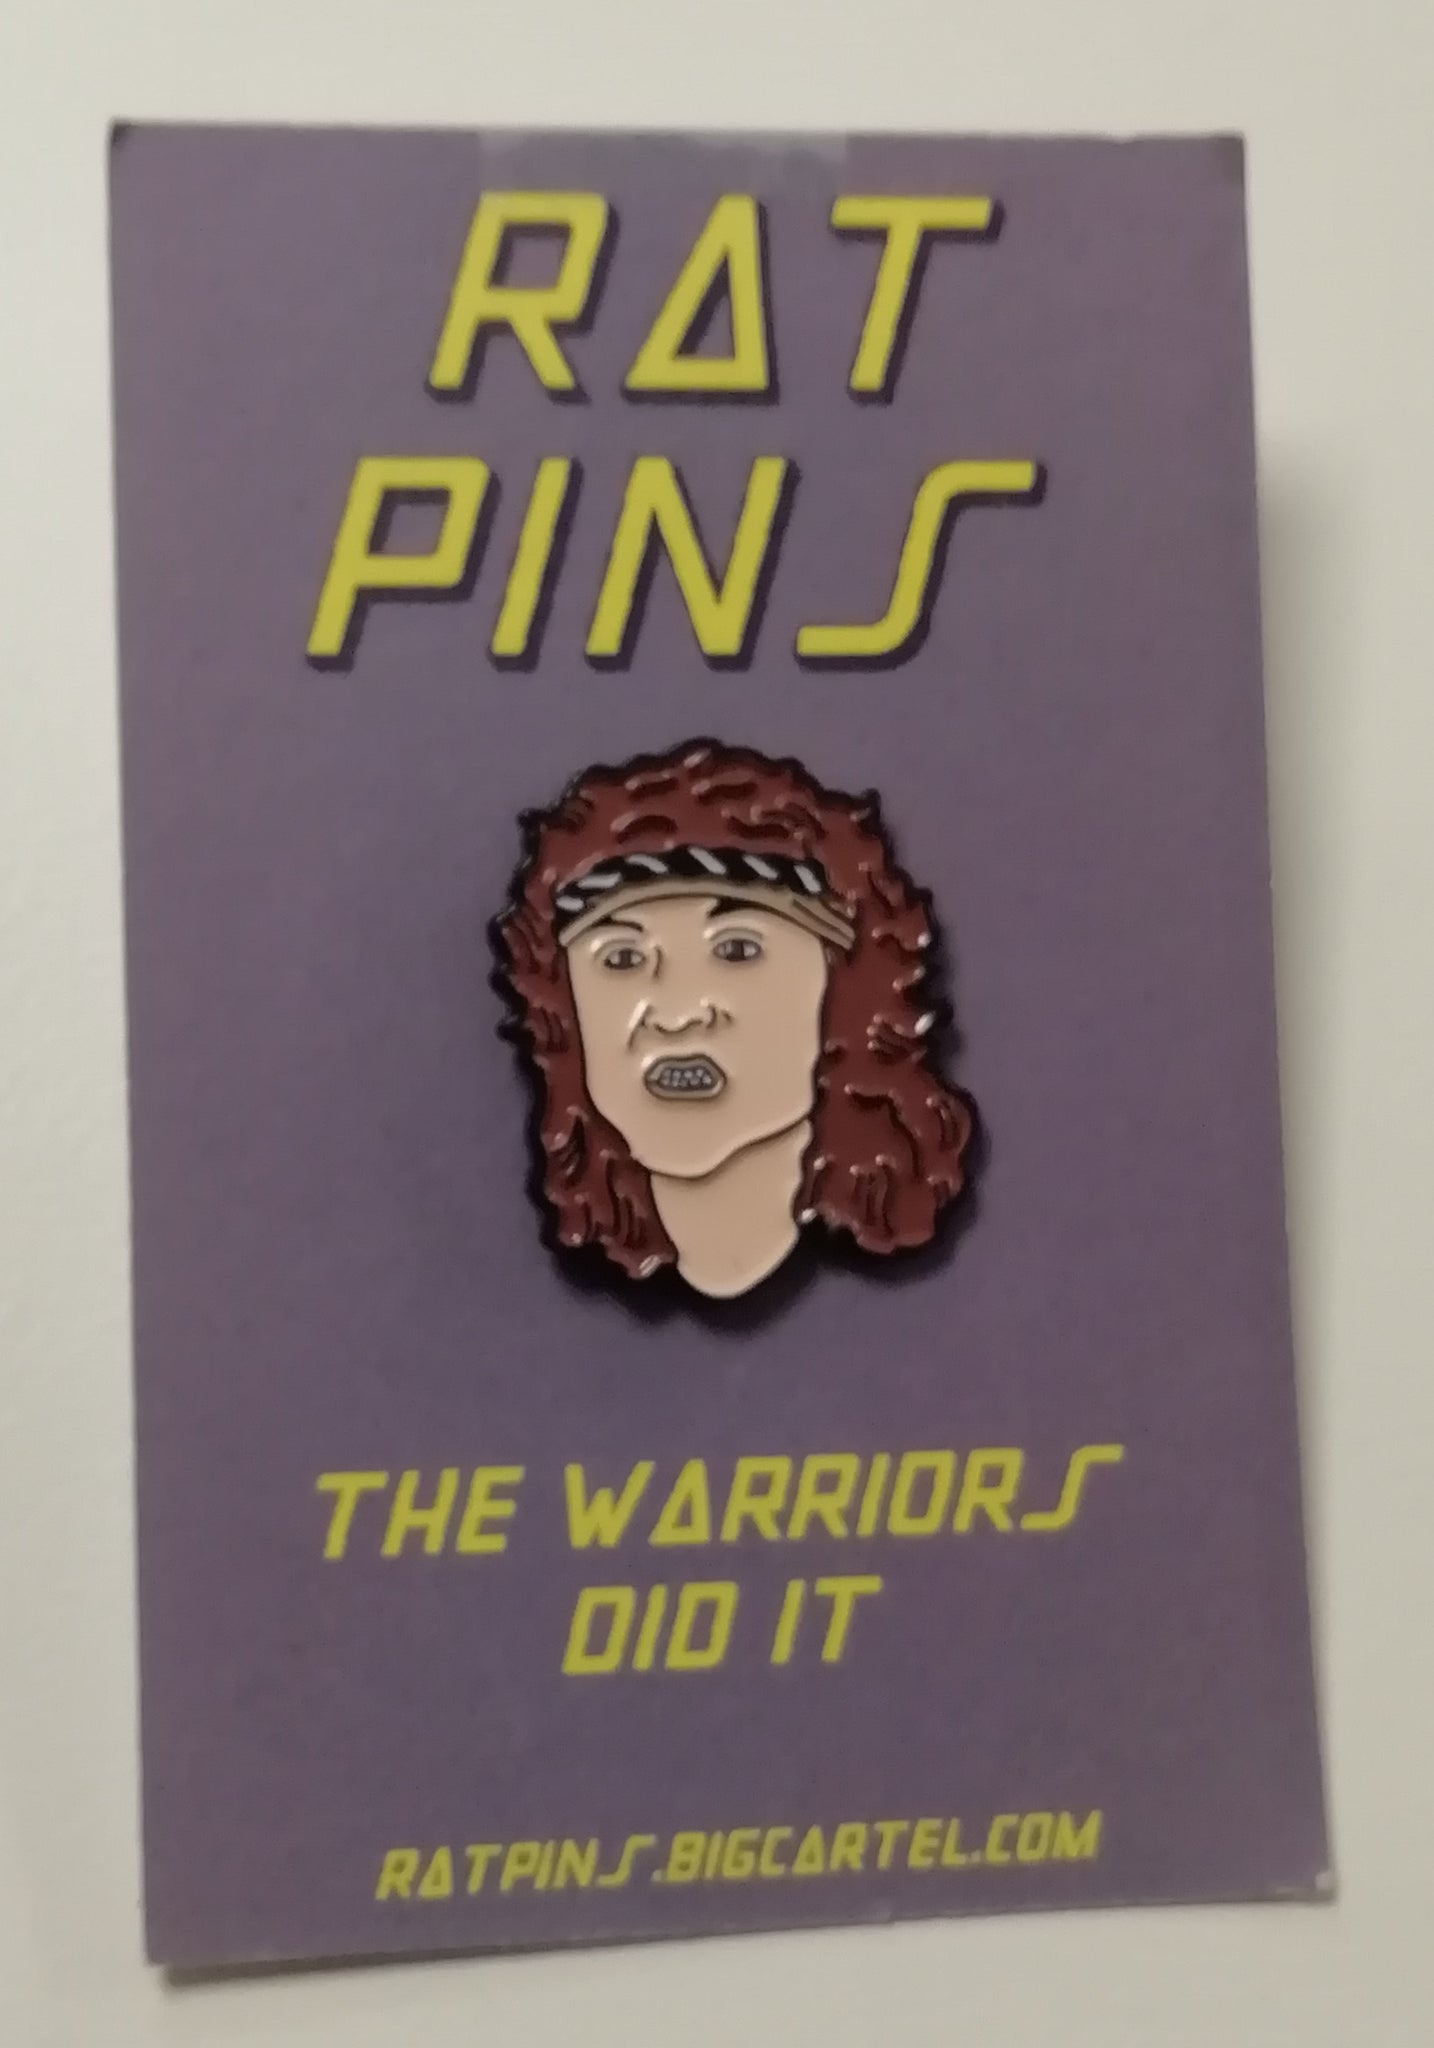 The Warriors - Limited Edition Enamel Pin Design